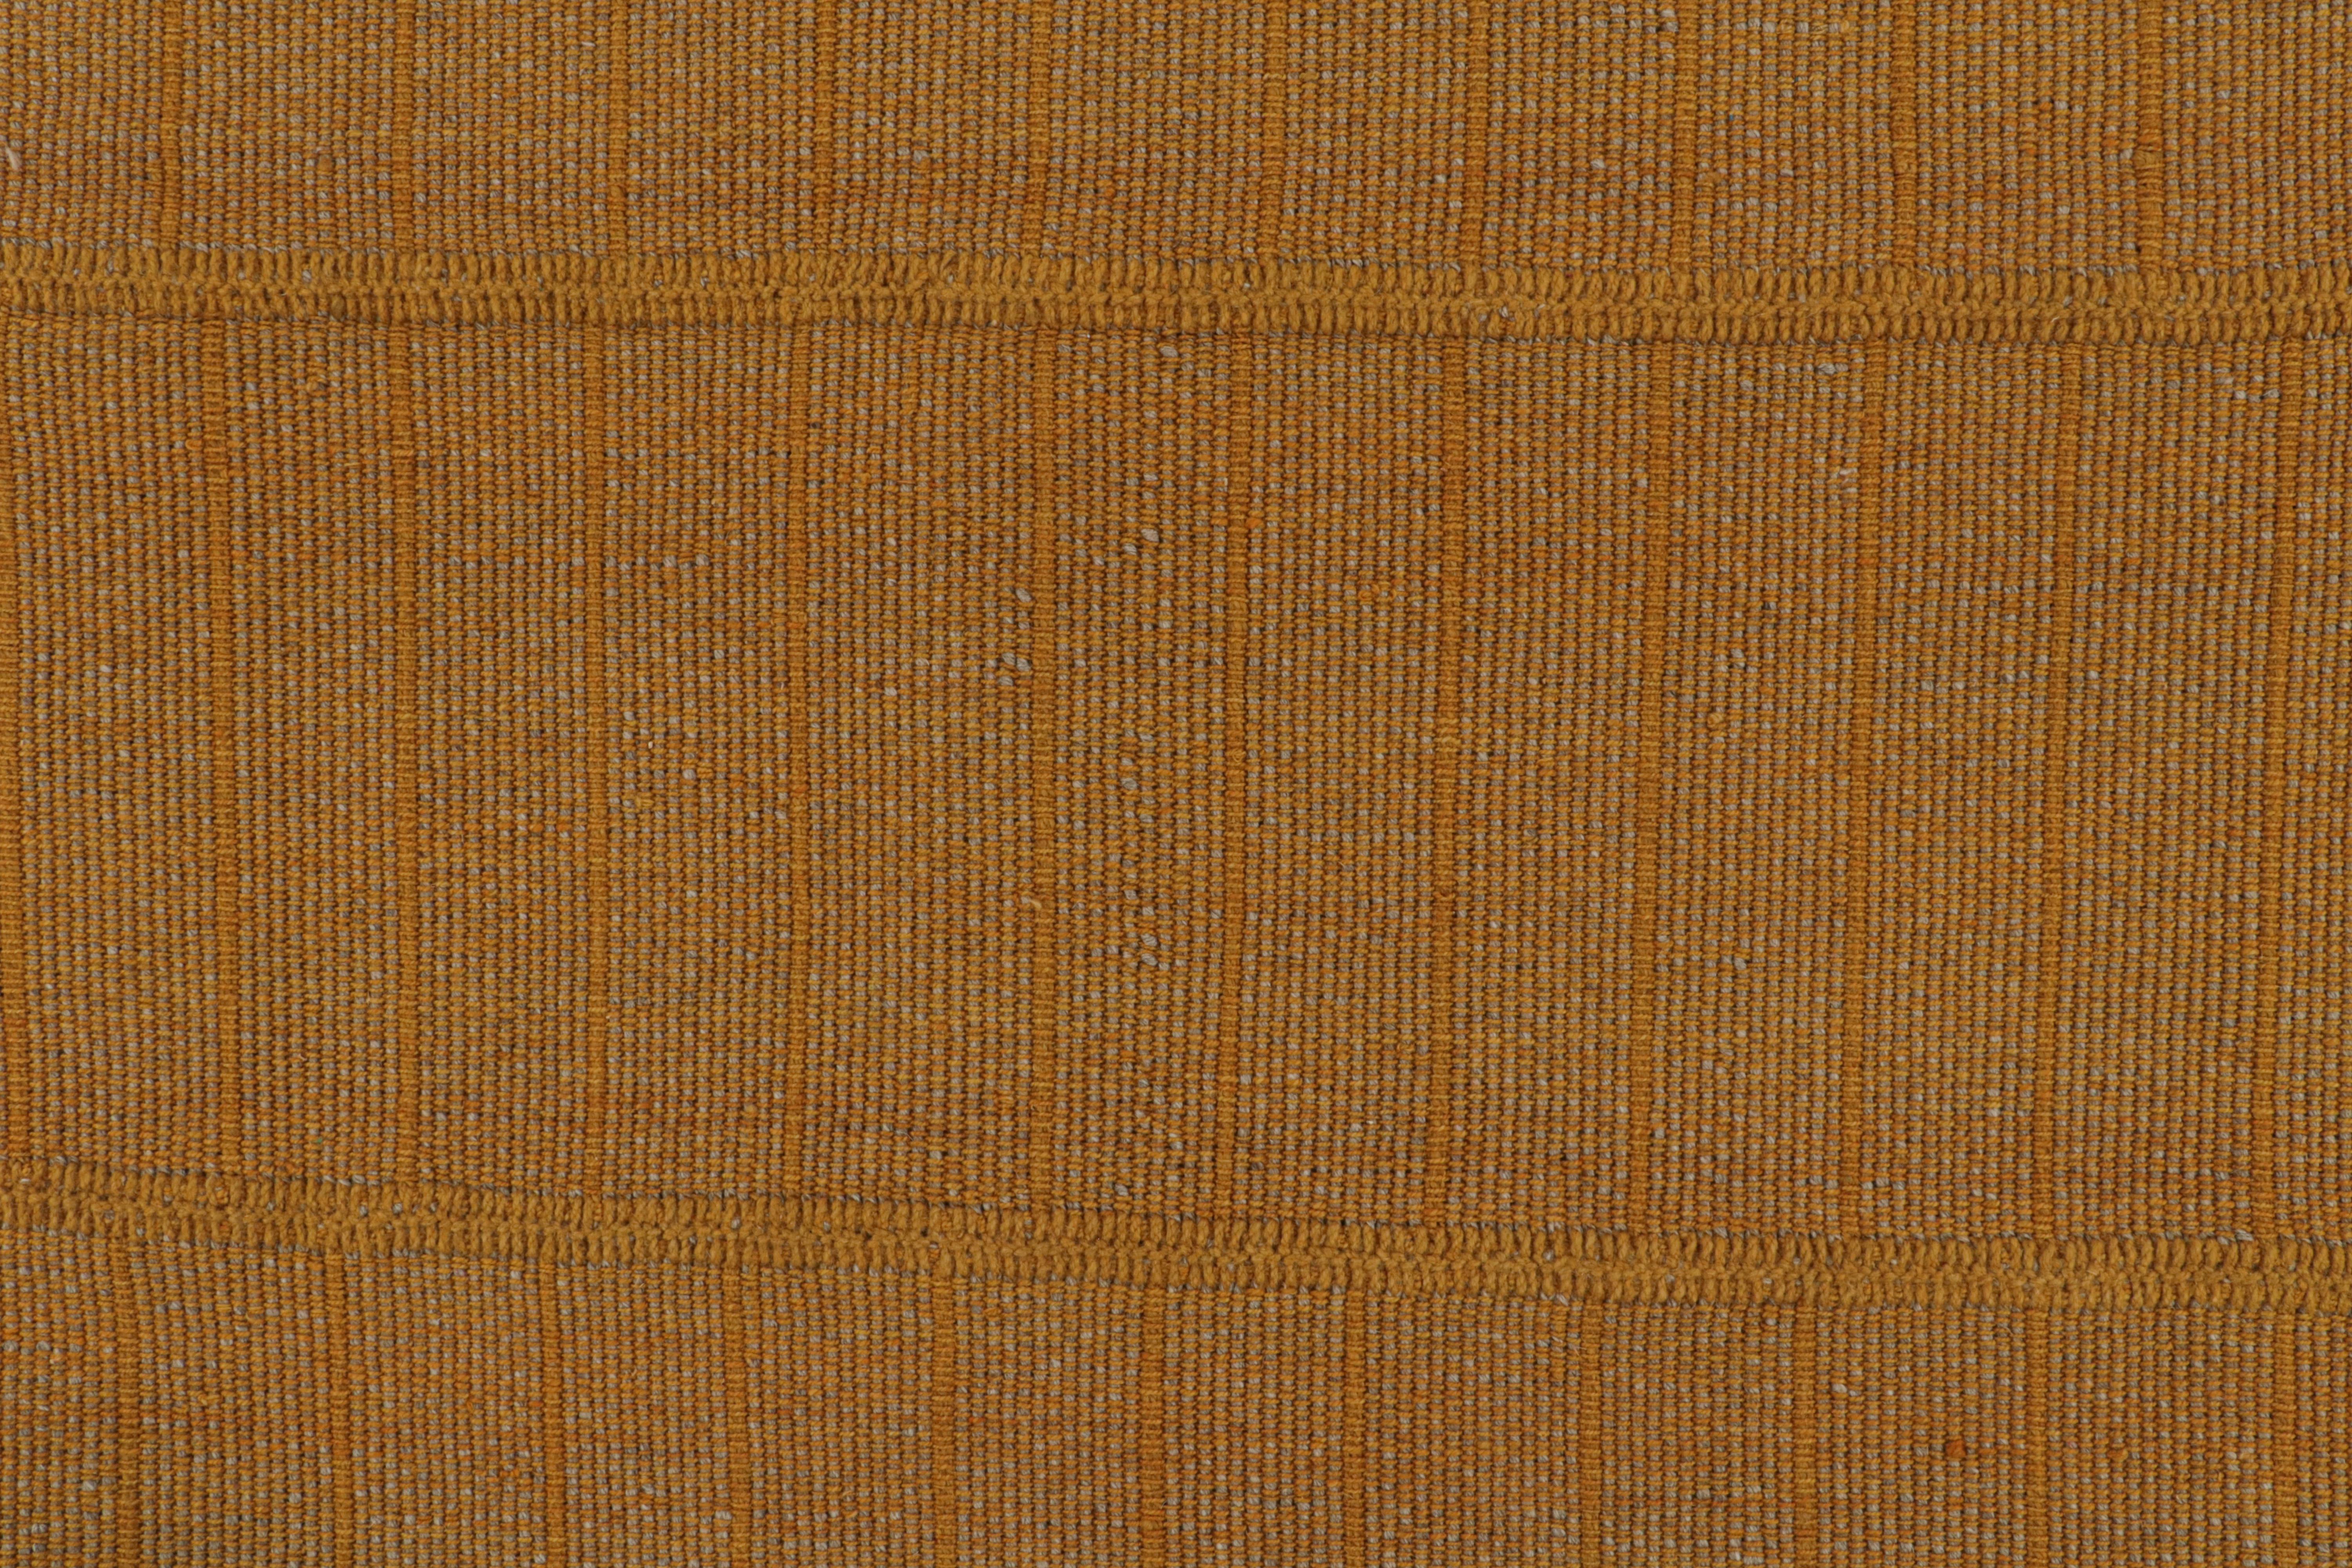 Contemporary Rug & Kilim’s Modern Kilim Rug with Textural Stripes in Gold and Orange Tones For Sale